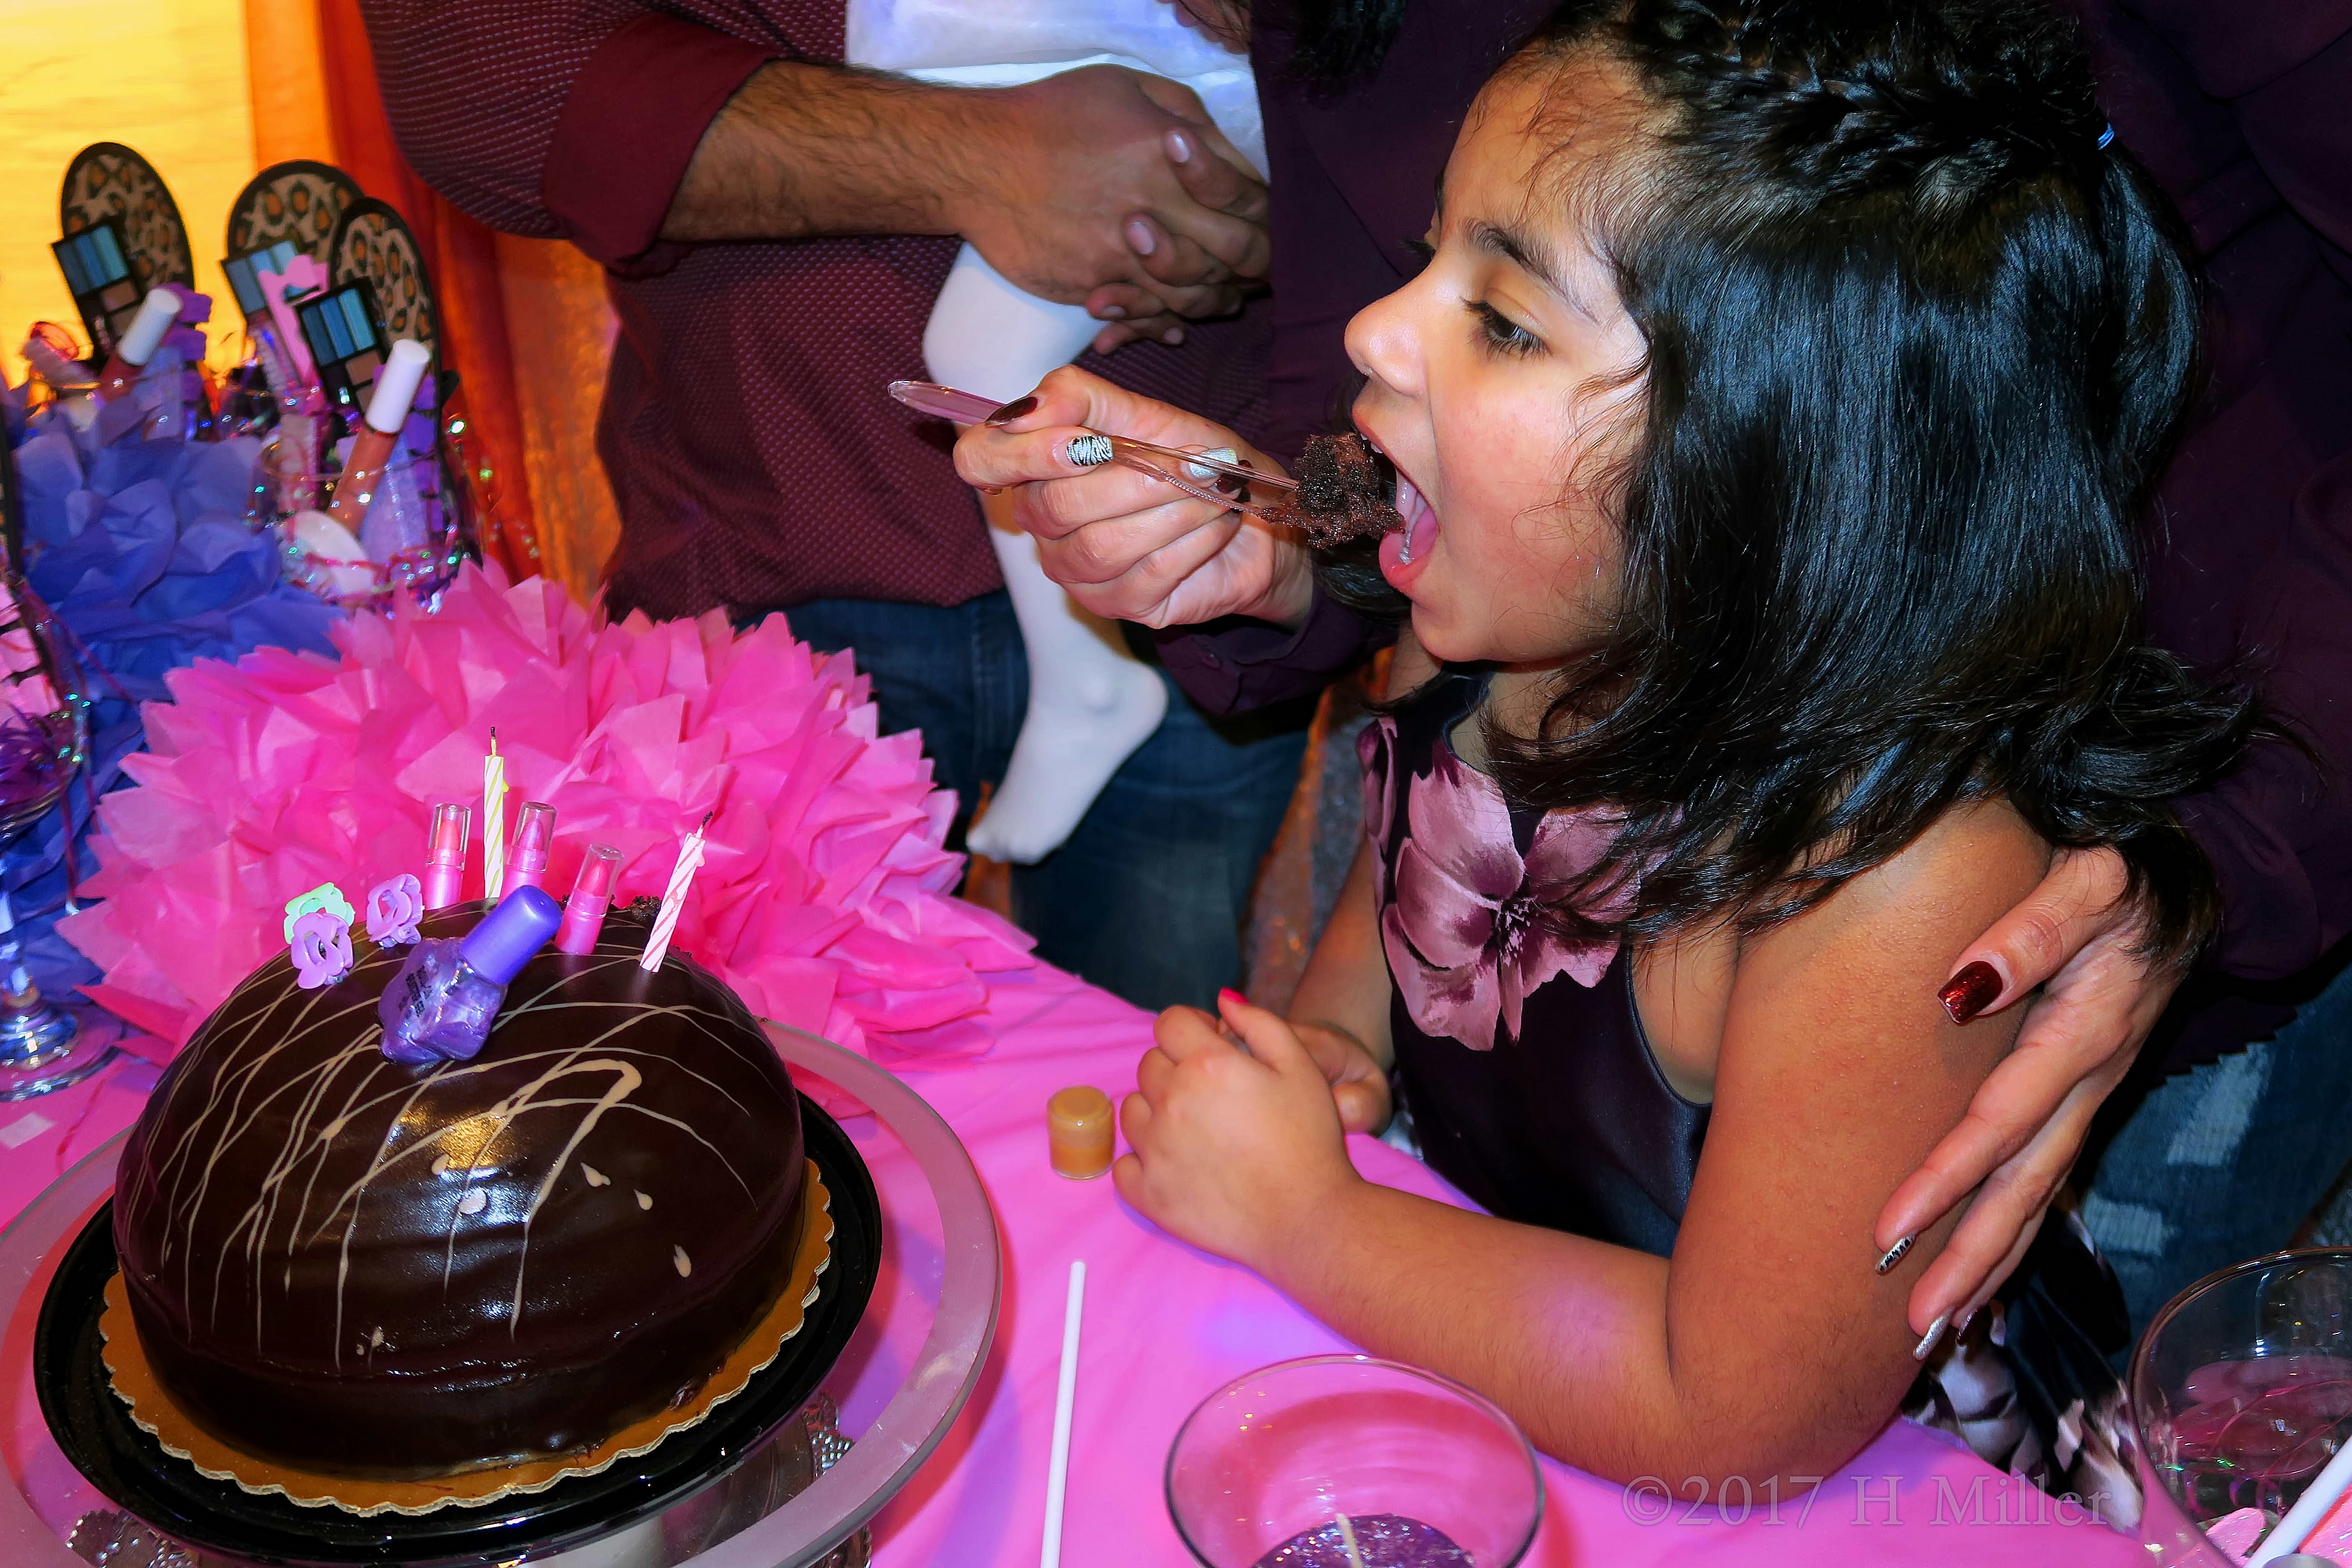 Her Mom Feeds Her The Birthday Cake. 